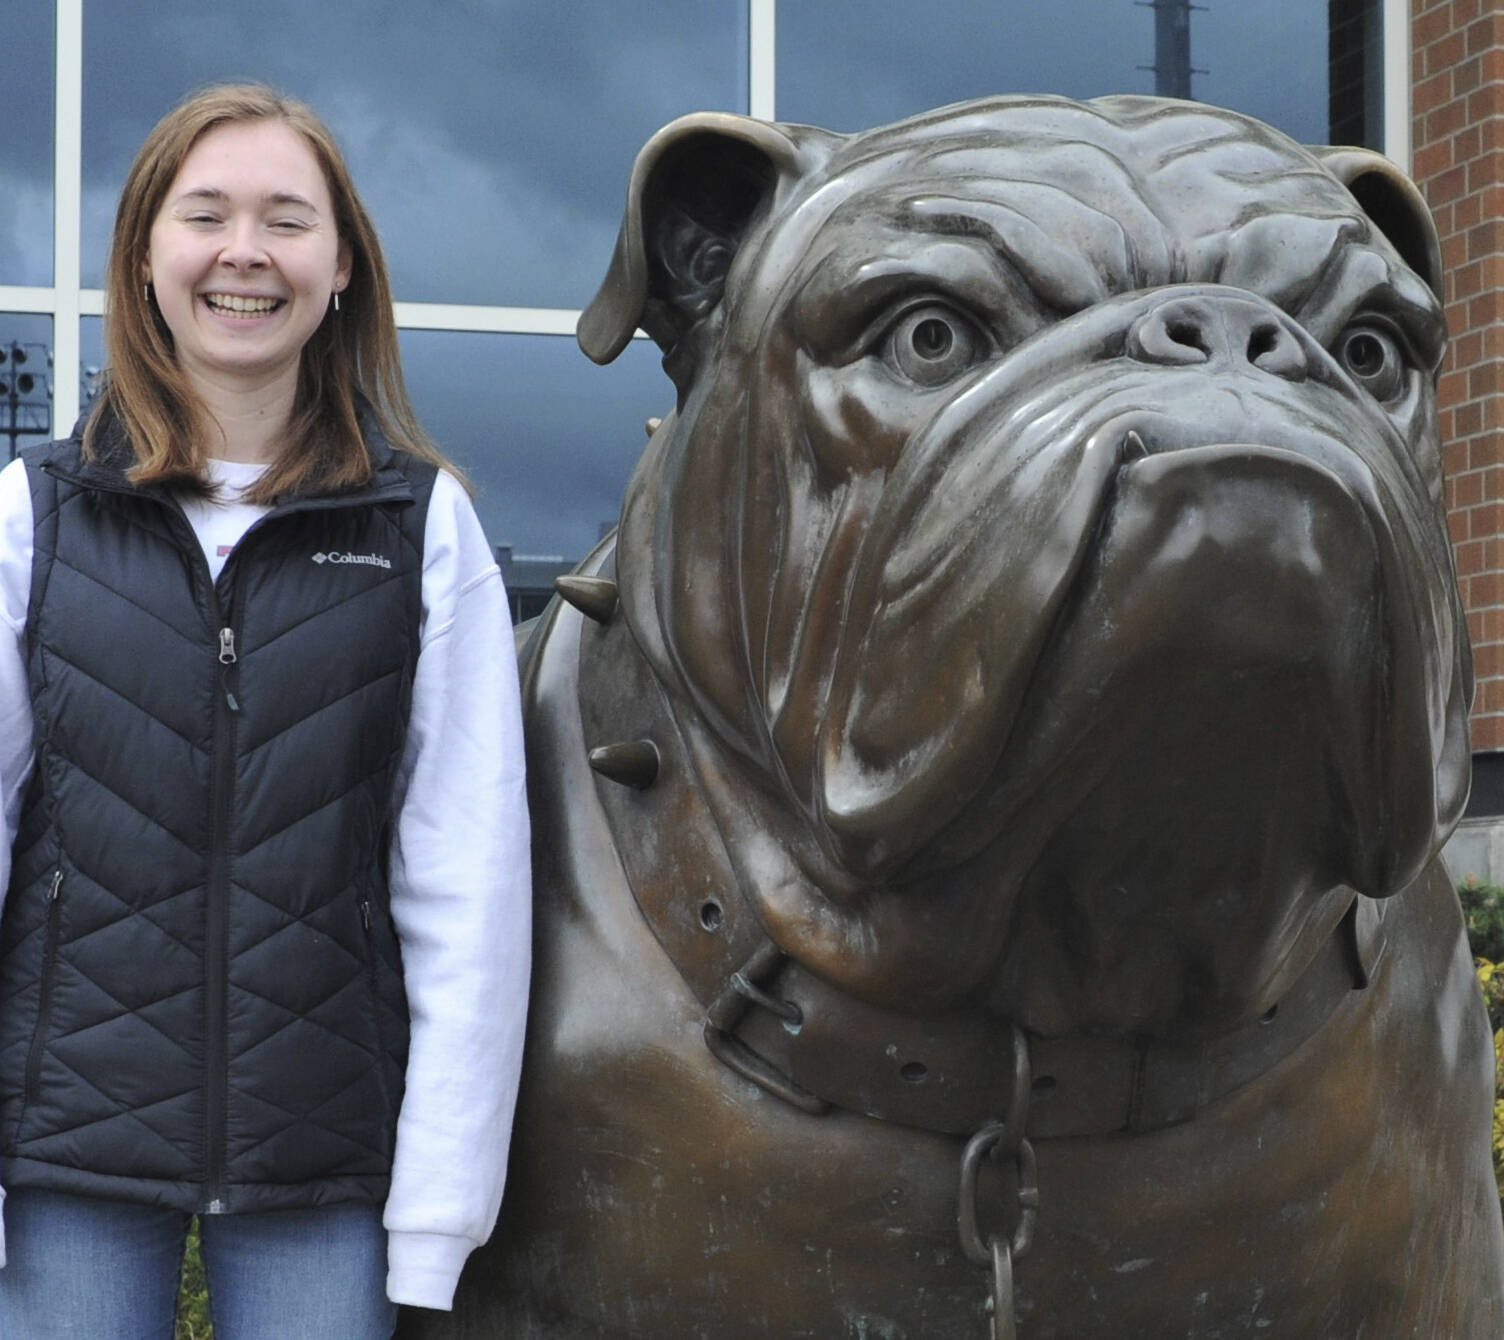 Madelyn Archibald with Spike the Gonzaga Bulldog at the Gonzaga University campus gymnasium where she plays saxophone in the Gonzaga pep band. Submitted photo